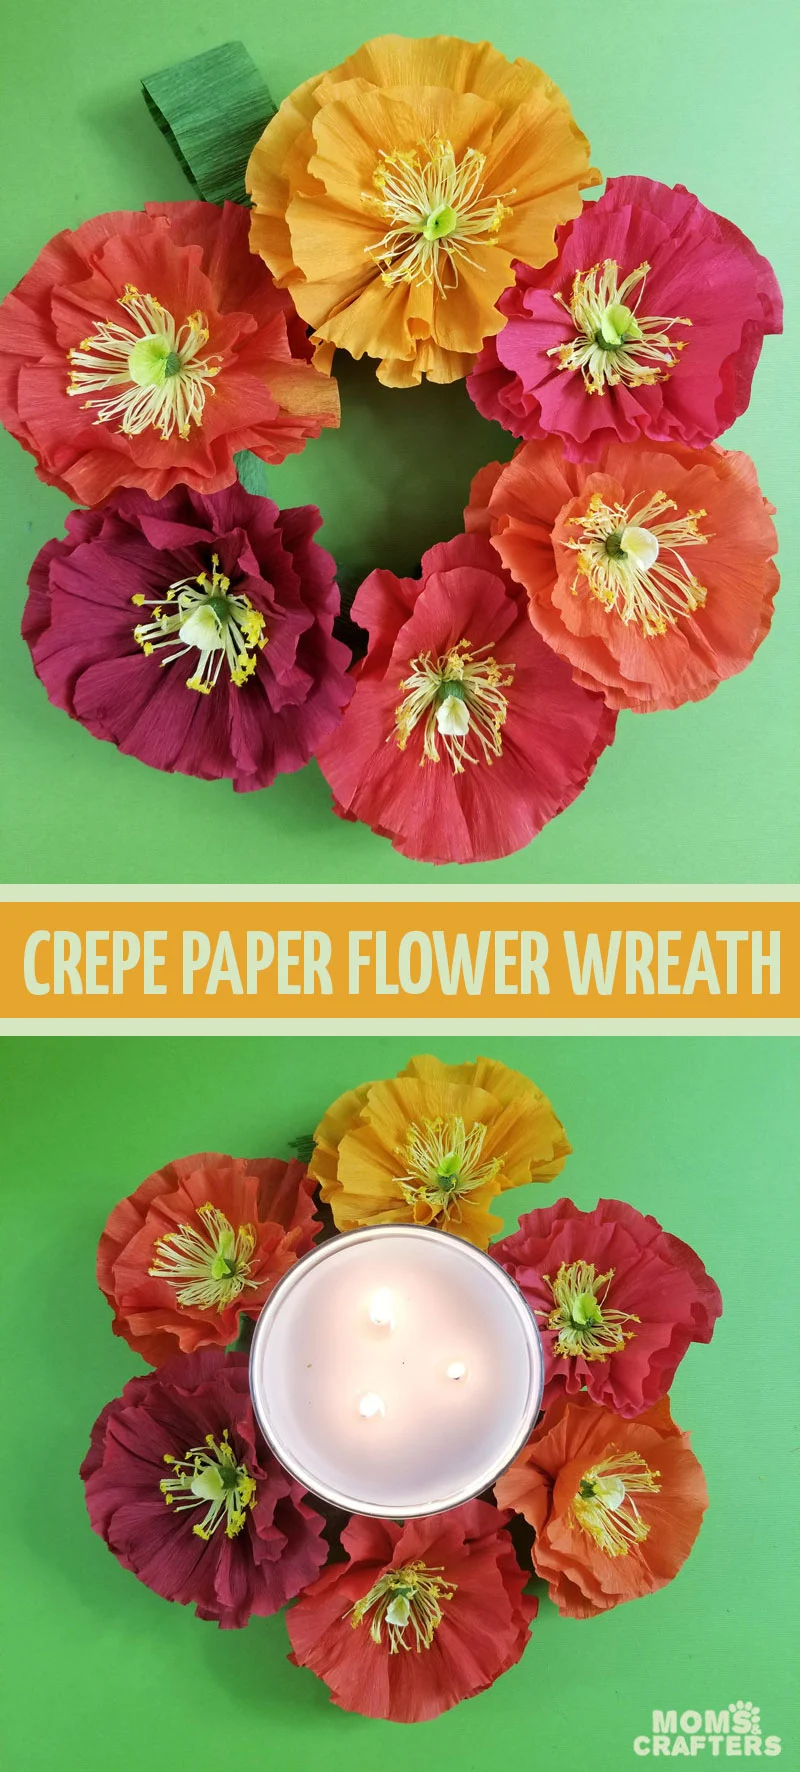 Click to learn how to make your own crepe paper flower wreath and Autumn table decor perfect for Thanksgiving!